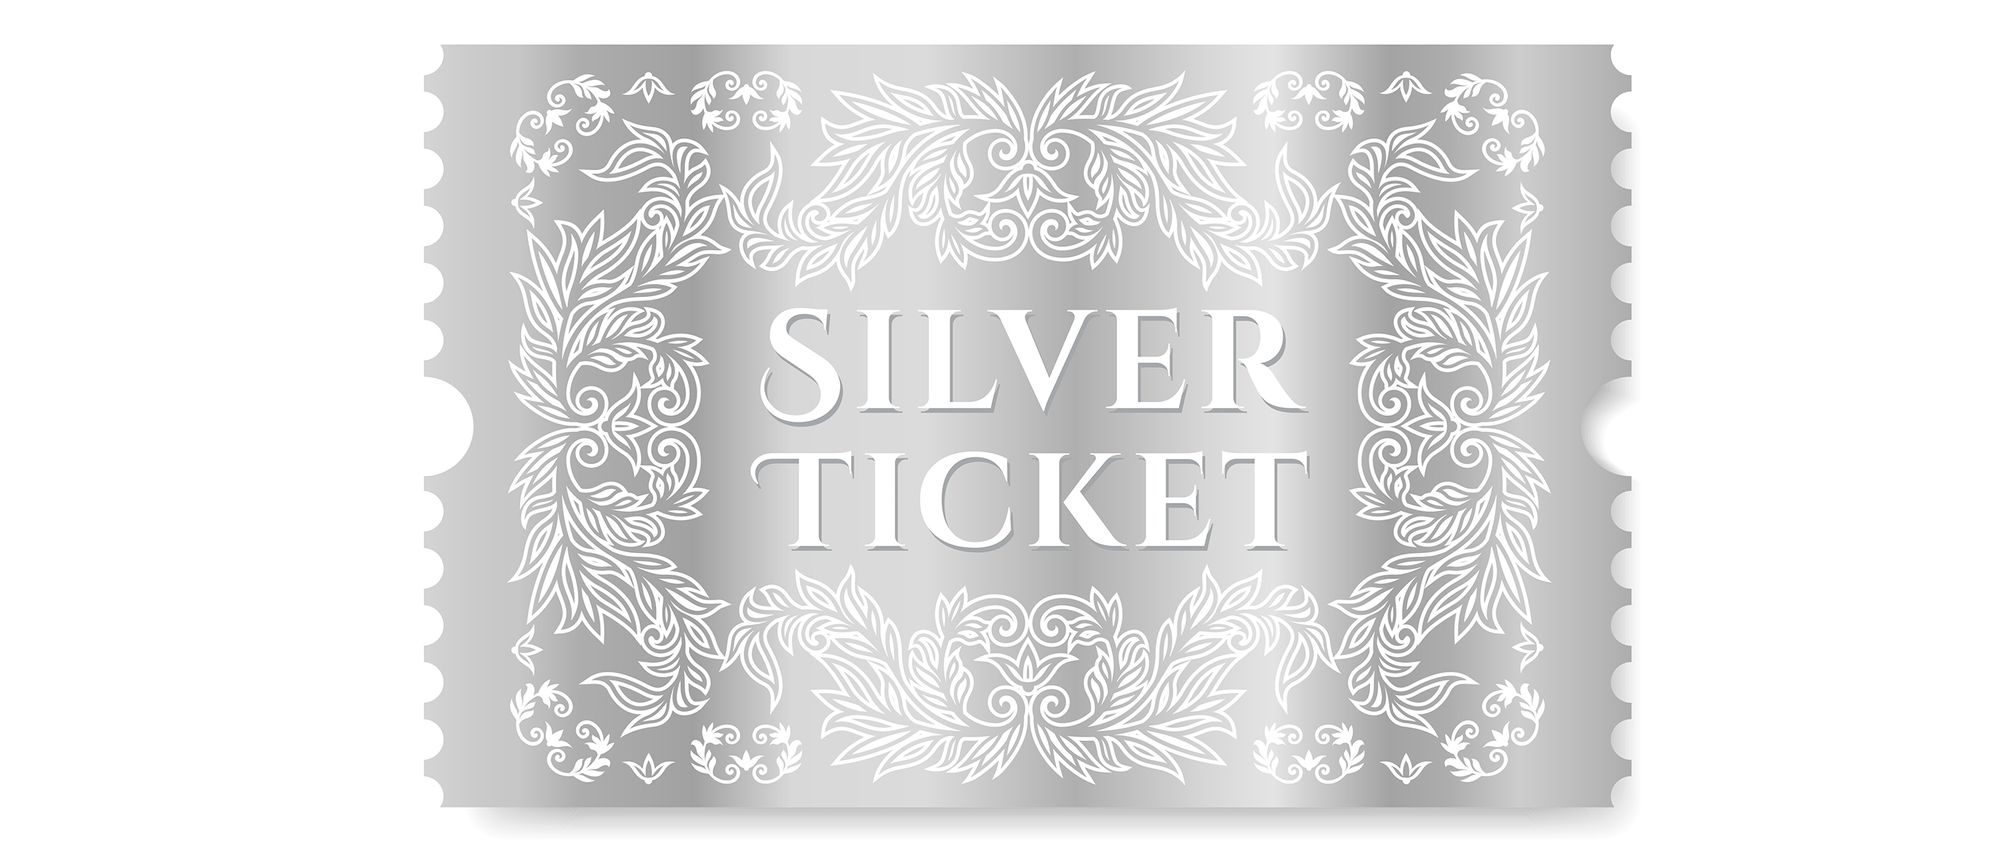 QOMPLX Knowledge: Silver Ticket Attacks Explained